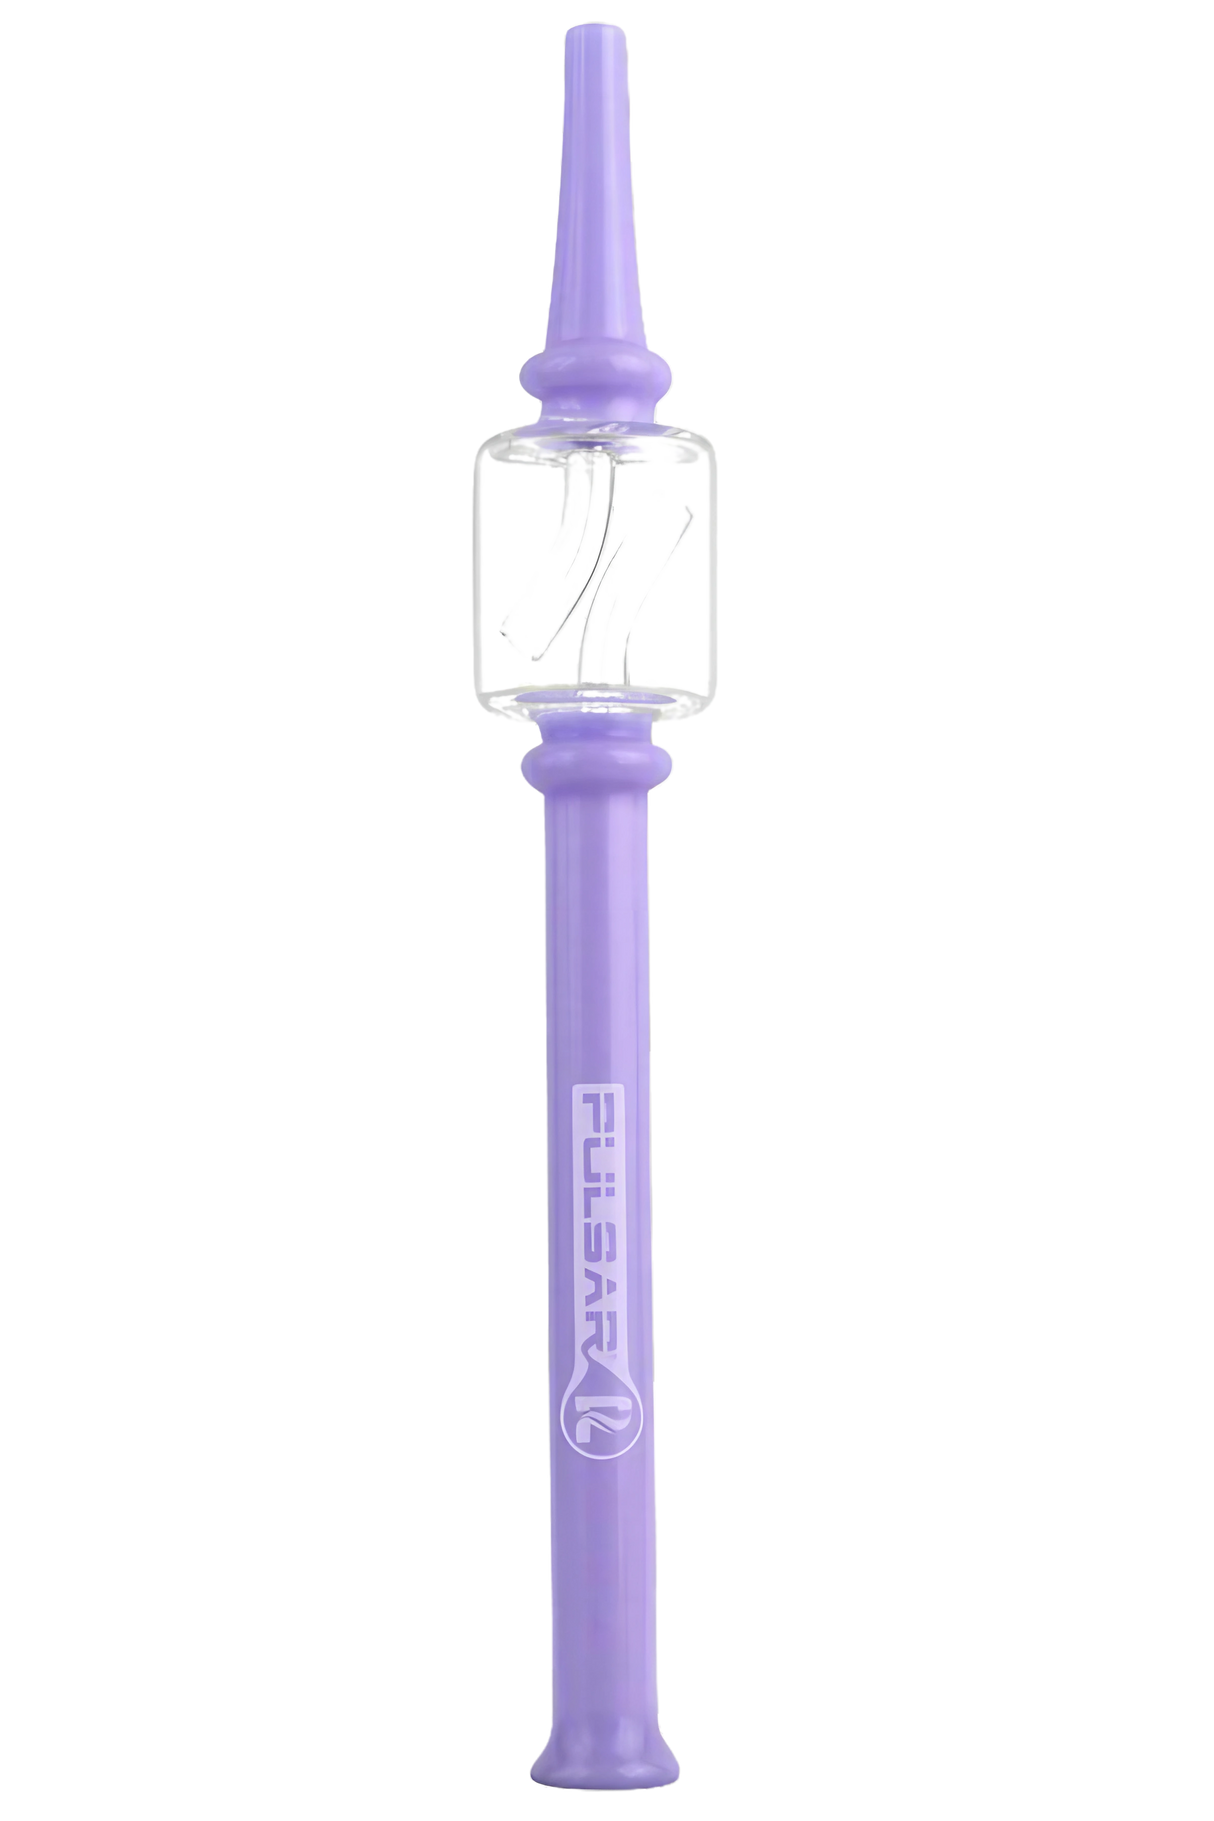 Pulsar 8" Borosilicate Glass Dab Straw Nectar Collector in Purple - Front View